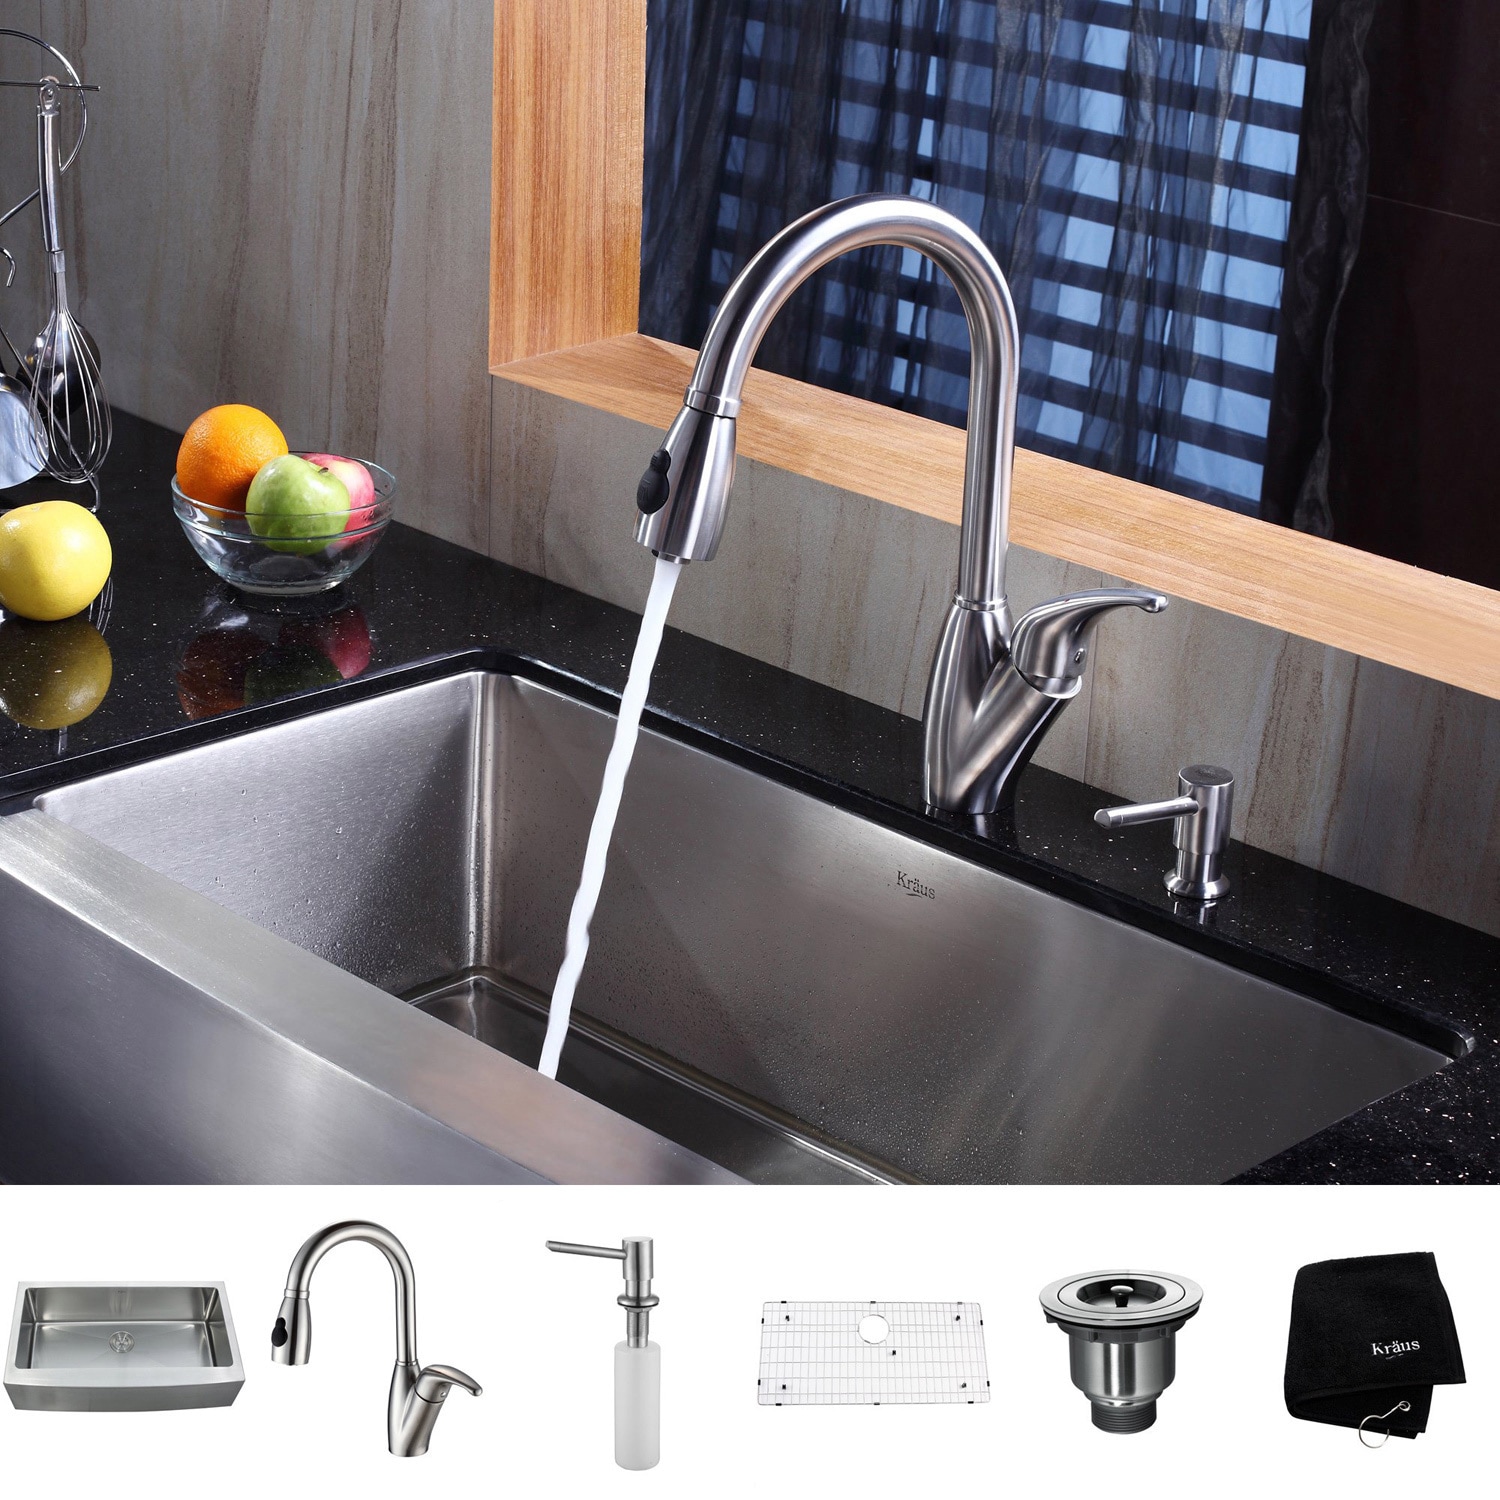 https://ak1.ostkcdn.com/images/products/4389932/Kraus-Kitchen-Combo-Set-Stainless-Steel-36-inch-Farmhouse-Sink-with-Faucet-006832a2-62c1-477b-92b3-9bf972f6415c.jpg